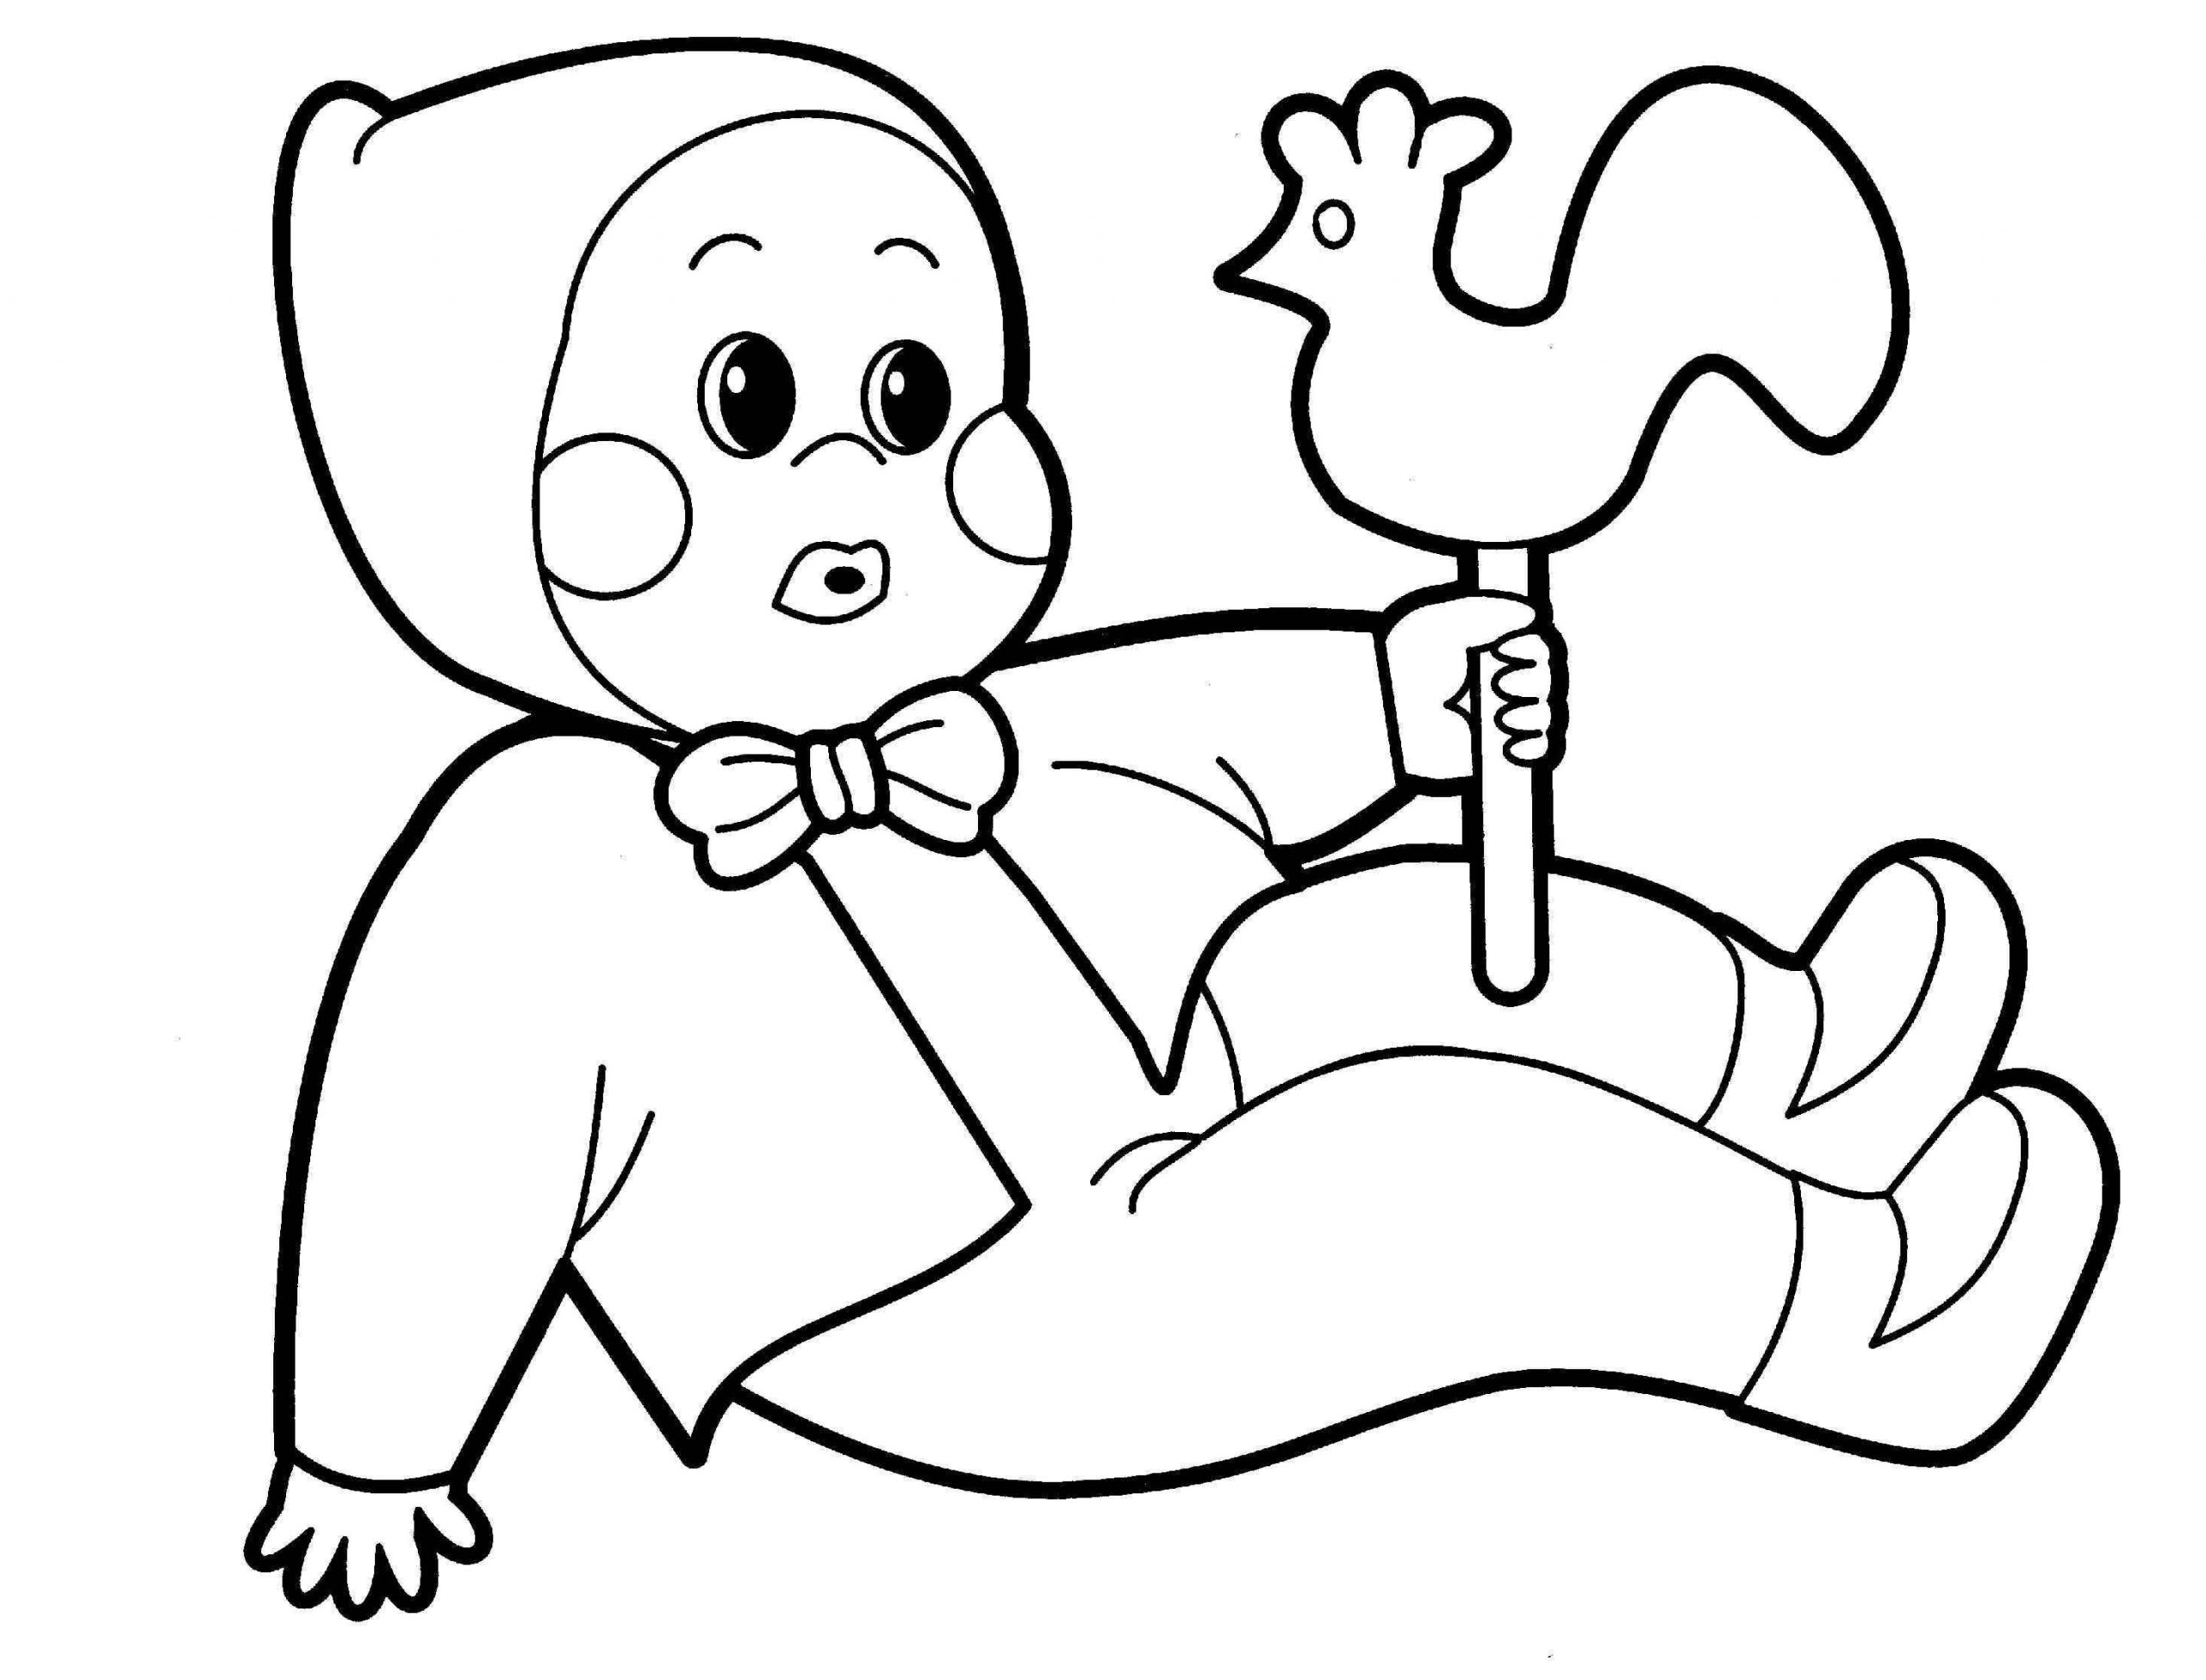 Baby Doll Coloring Pages
 Baby Doll Coloring Pages Home Sketch Coloring Page